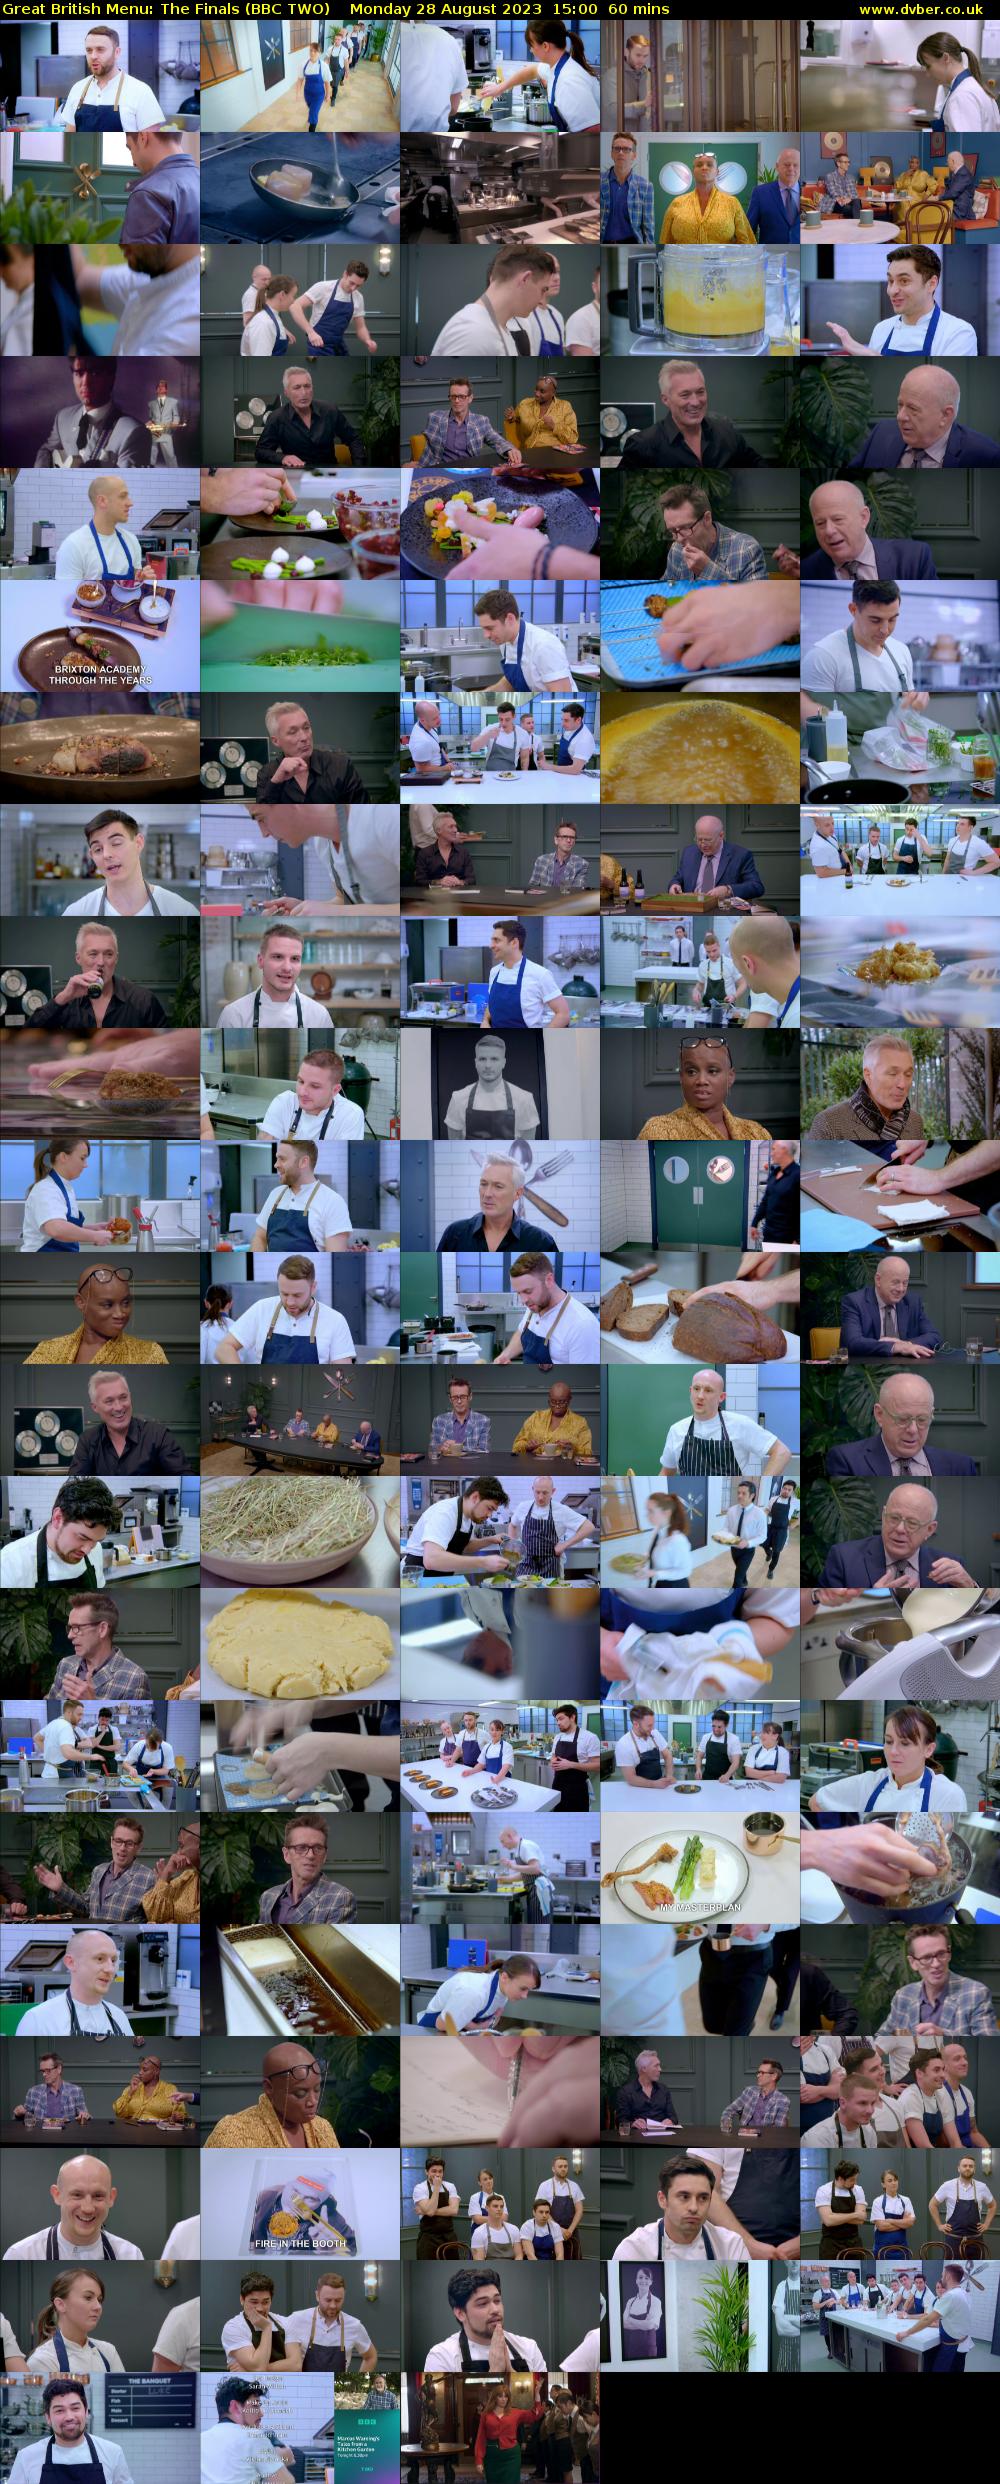 Great British Menu: The Finals (BBC TWO) Monday 28 August 2023 15:00 - 16:00